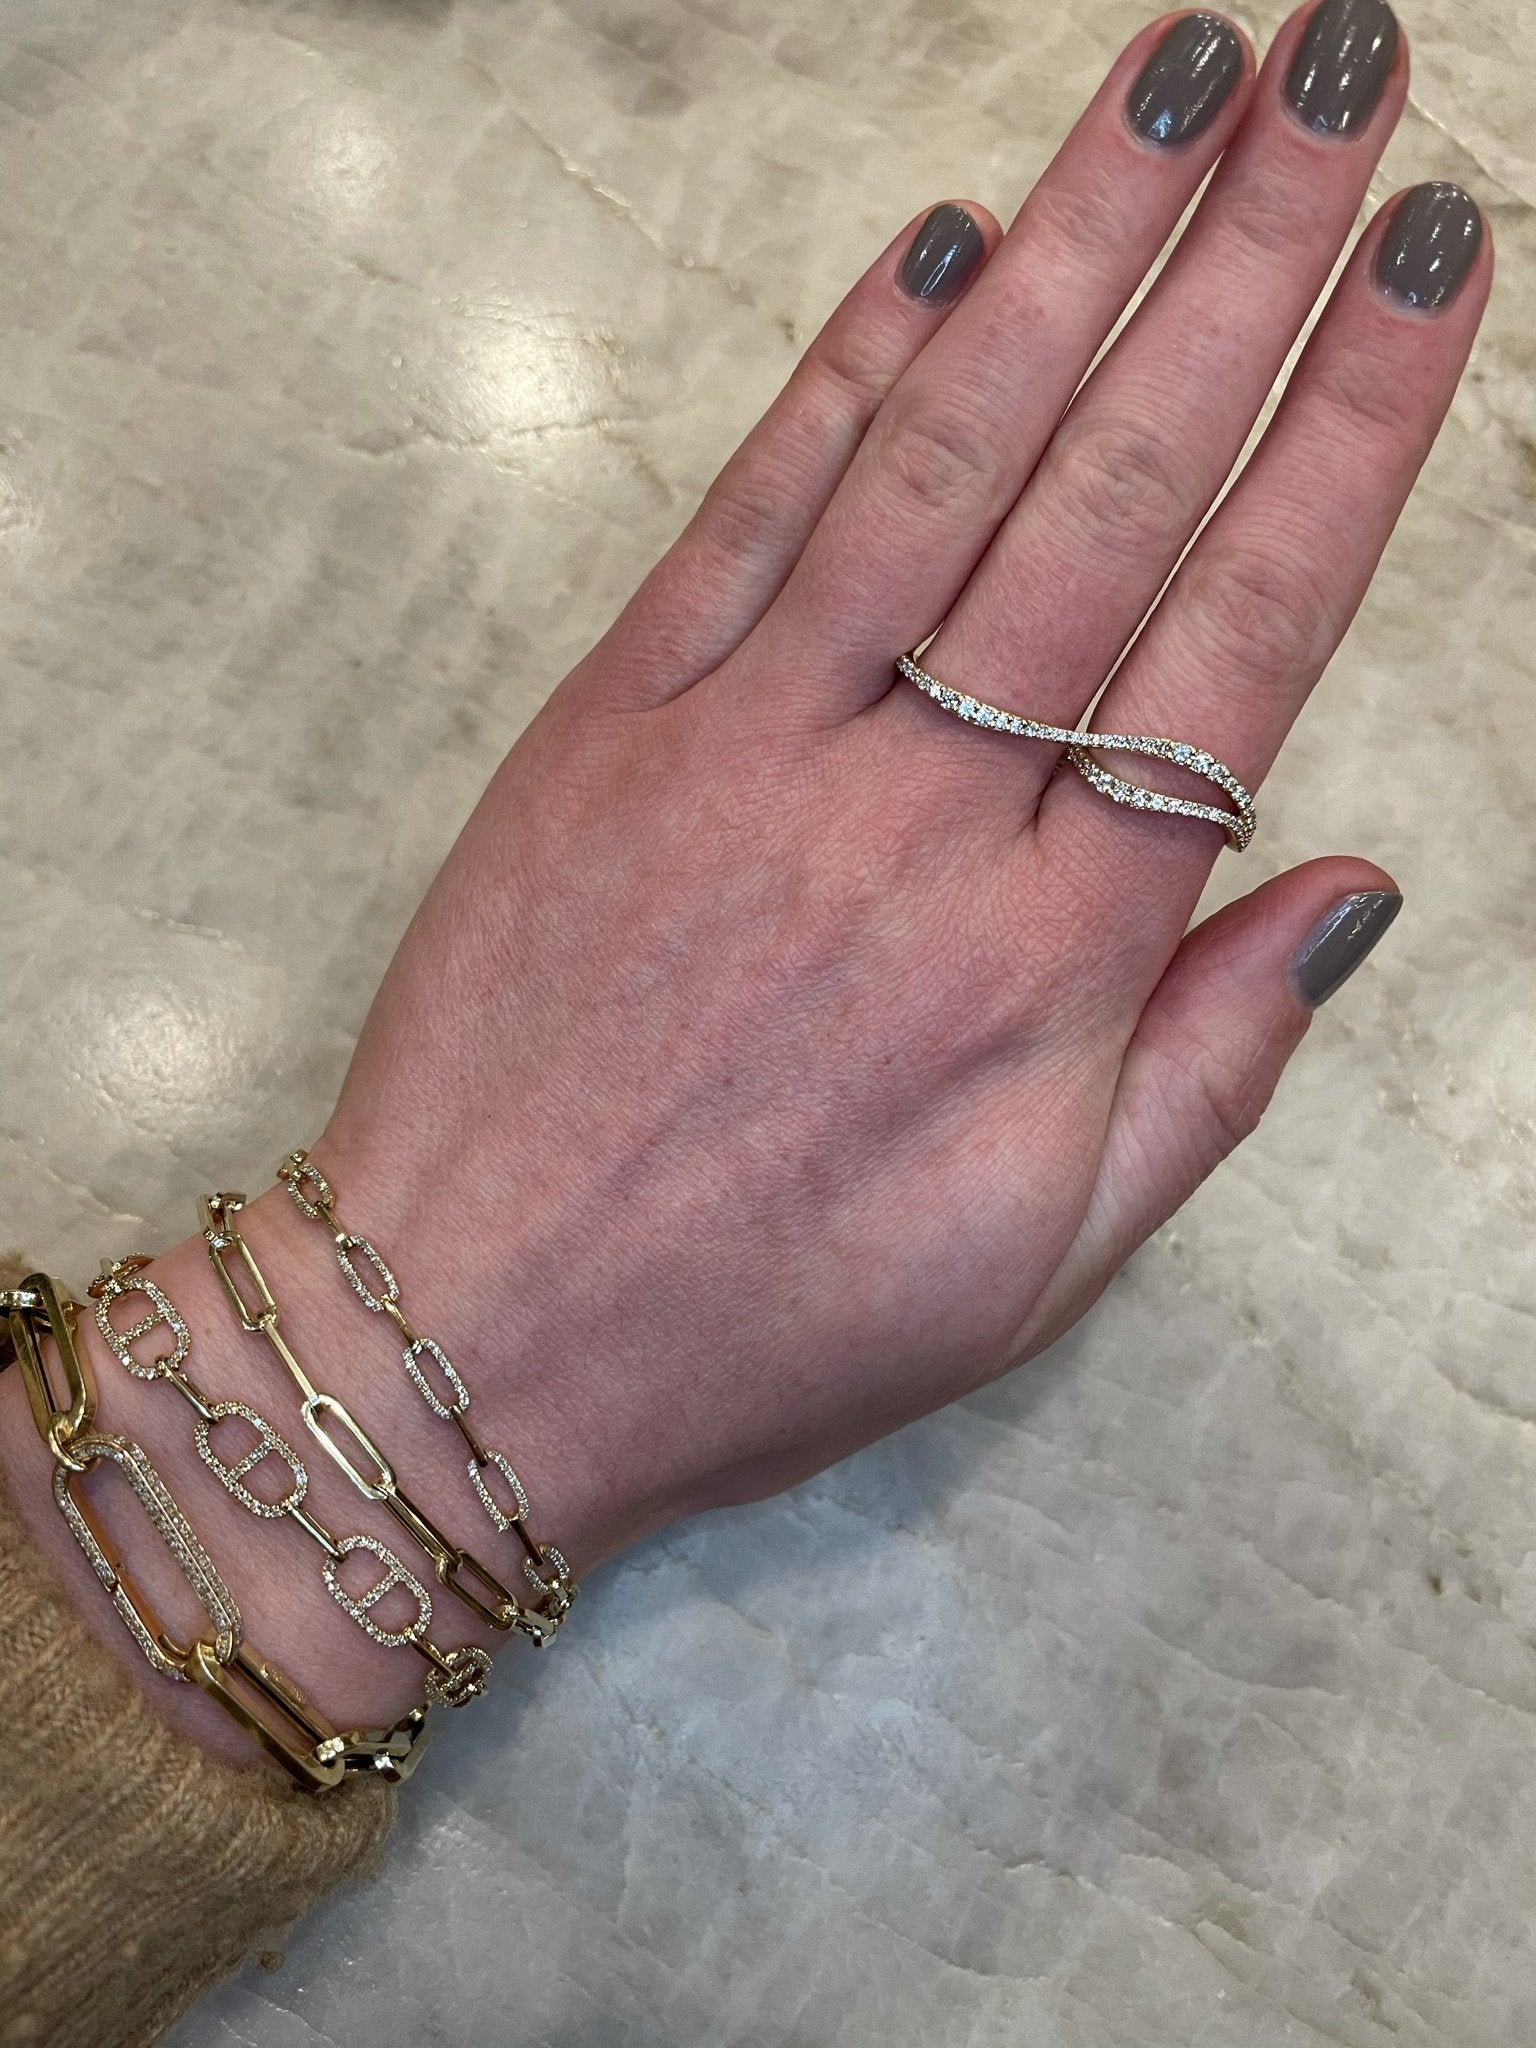 When Stars Align-Two Finger Ring – Adornment + Theory